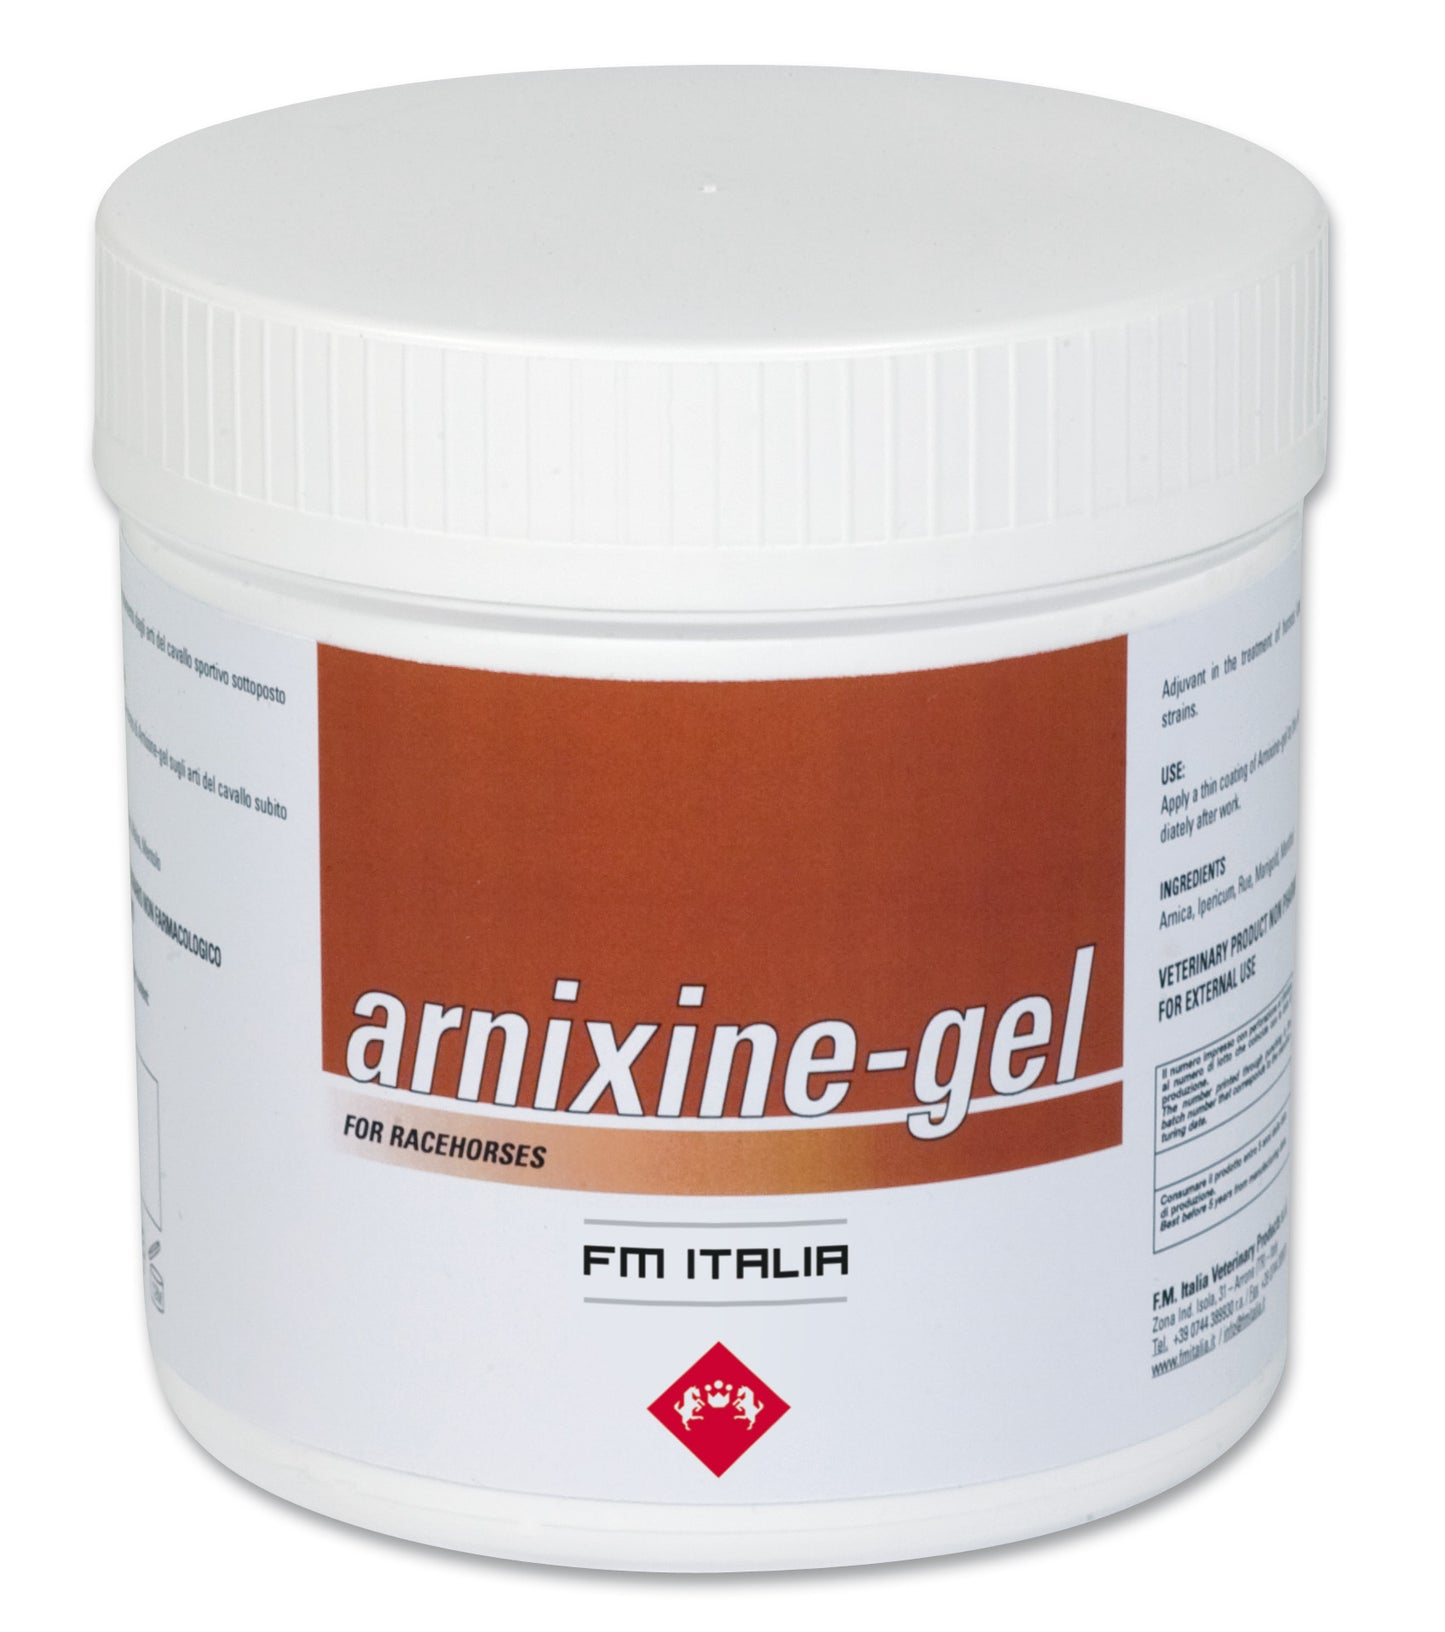 ARNIXINE GEL | Limb Care Gel for Horses with Arnica, Hypericum, Rue, Mallow, and Menthol